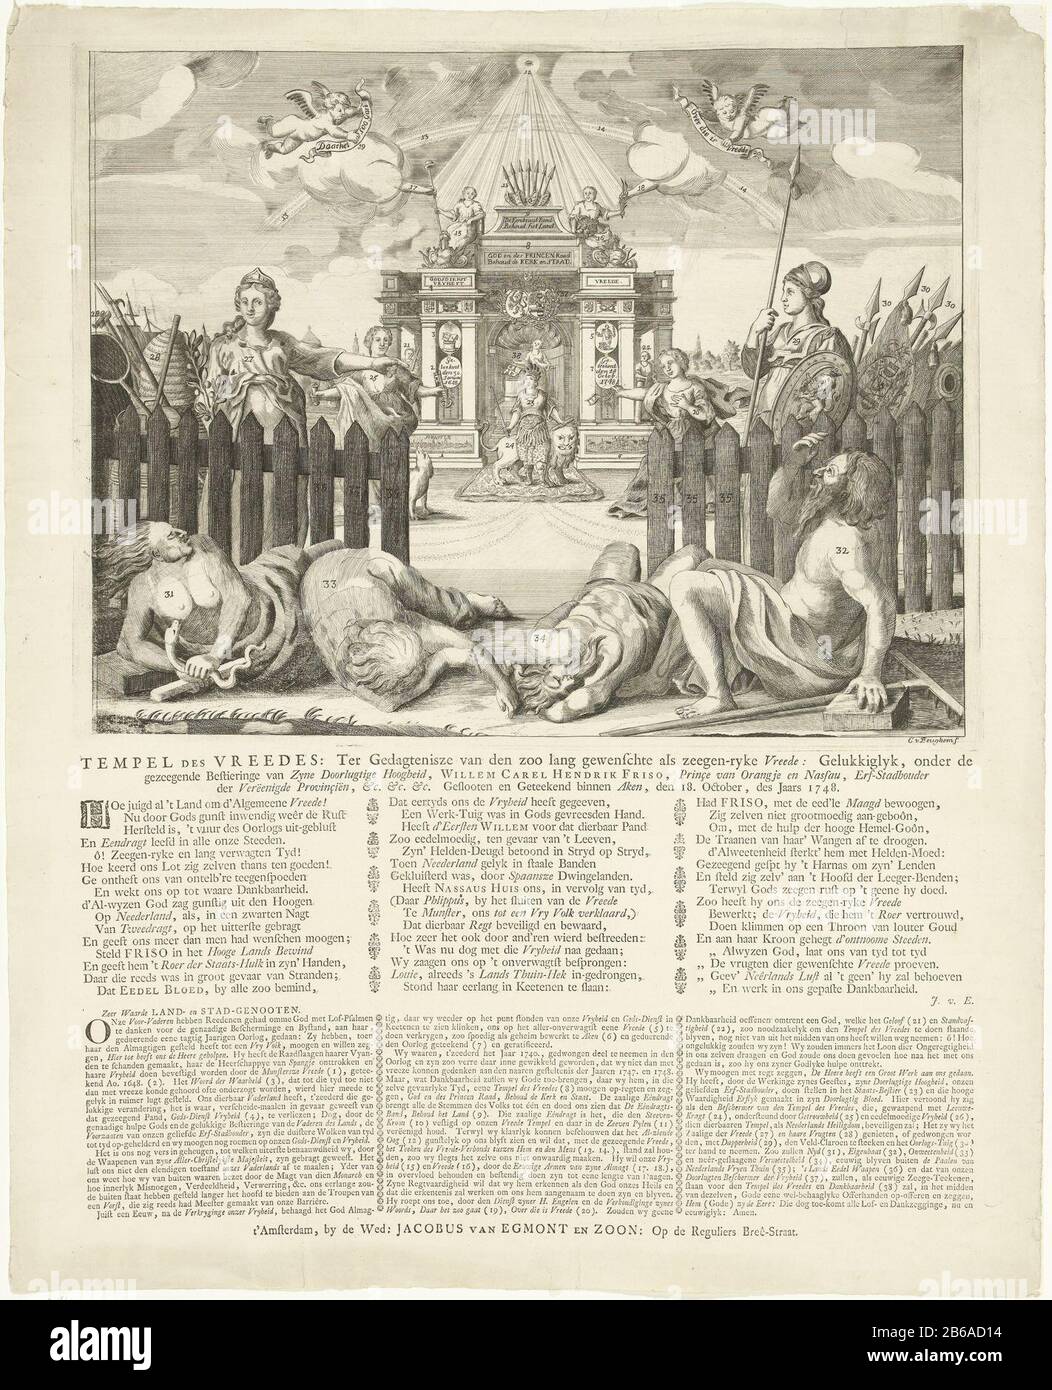 Allegory of the peace of Aachen Allegory on the Peace of Aachen which was closed on October 18, 1748 with glorification of William IV, prince of Orange-Nassau, who is with the Dutch lion for peace stamp. Under the picture is in letterpress explanatory text with reference to the numbers on the show. The text expresses gratitude for the preservation of religion and freedom, since the Peace of Westphalia (1648) several times jeopardized but the role of the prince and God preserved for vaderland. Manufacturer : printmaker: C. Beughem (listed object) writer: Monogrammist JVE (writer) (listed buildi Stock Photo